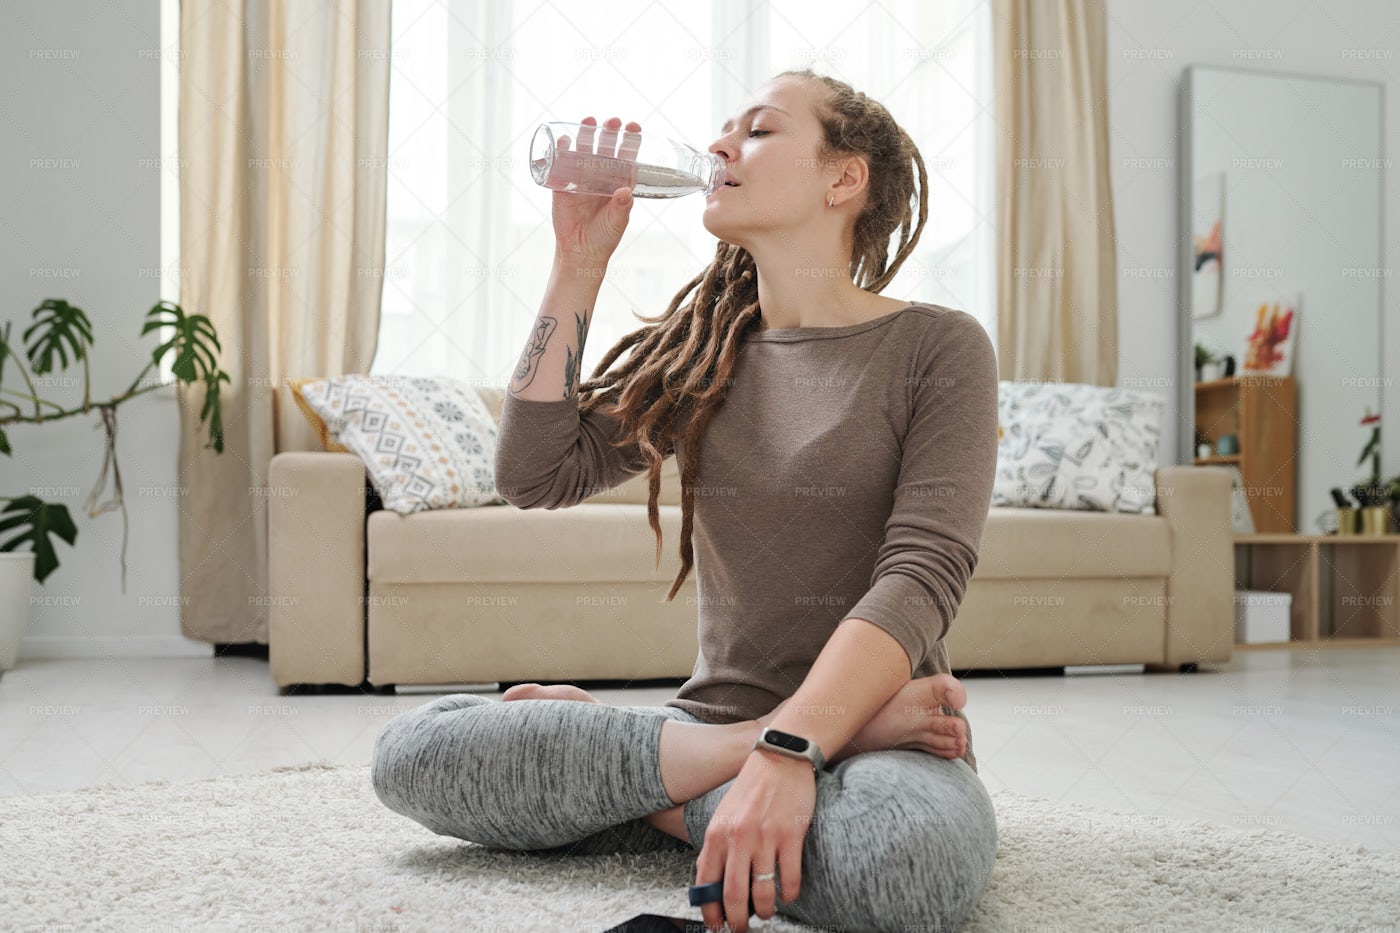 Thirsty Young Woman Drinking Water...: Stock Photos